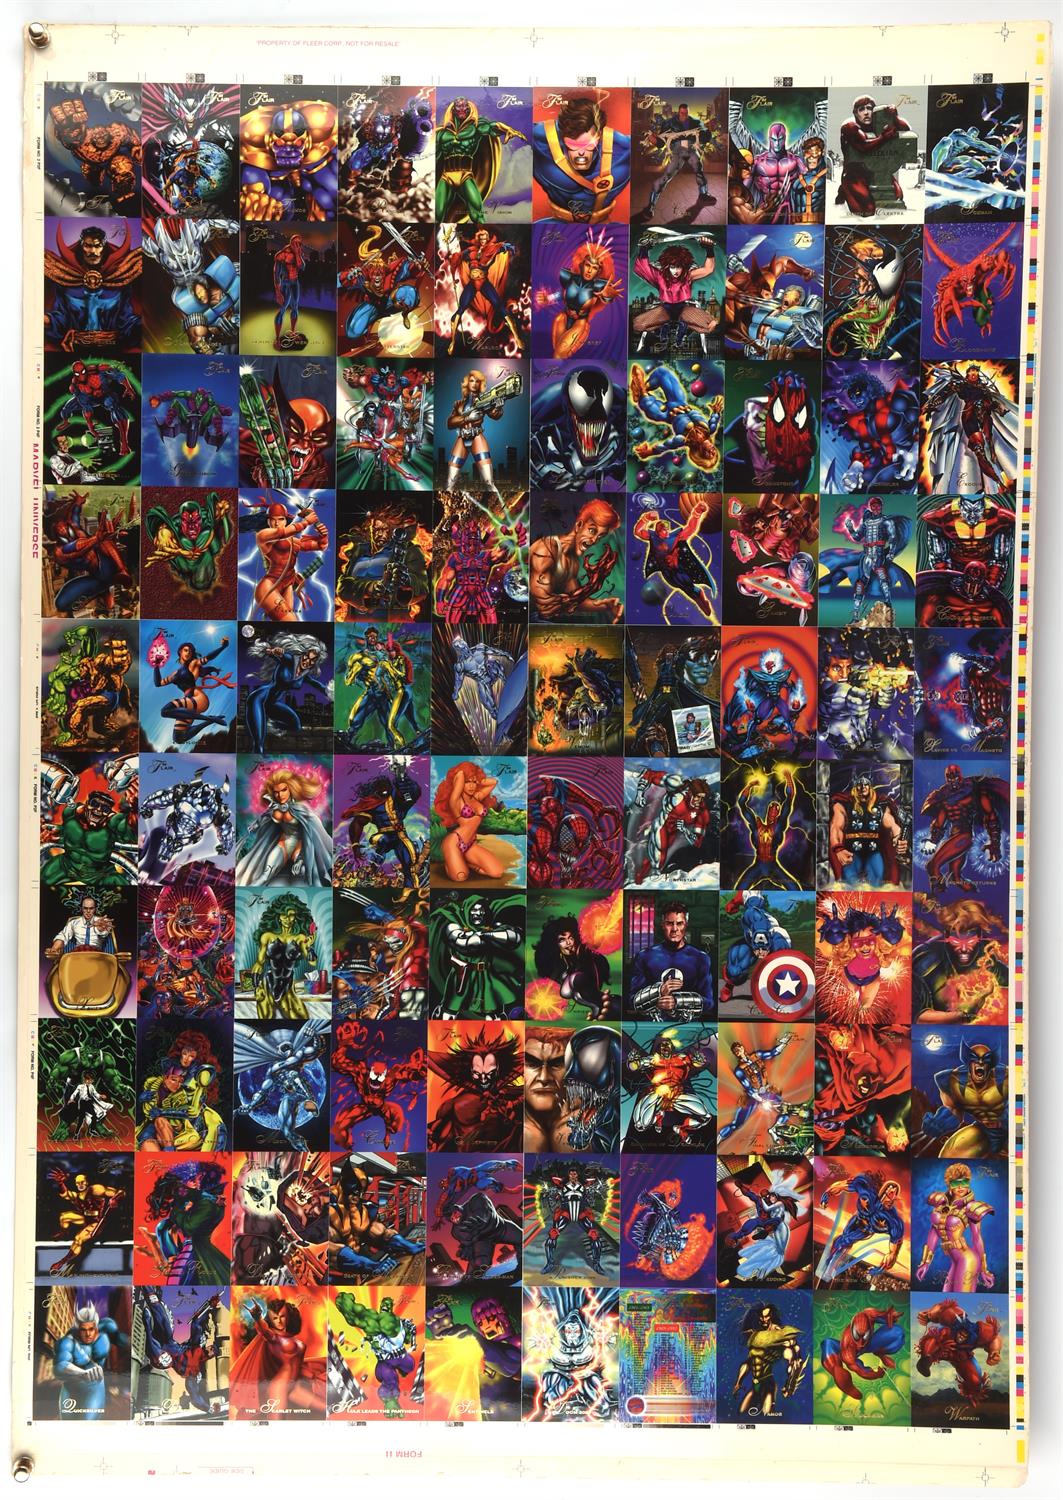 1994 Marvel Flair Uncut Sheet. Double sided printing with both the front and back of the cards.